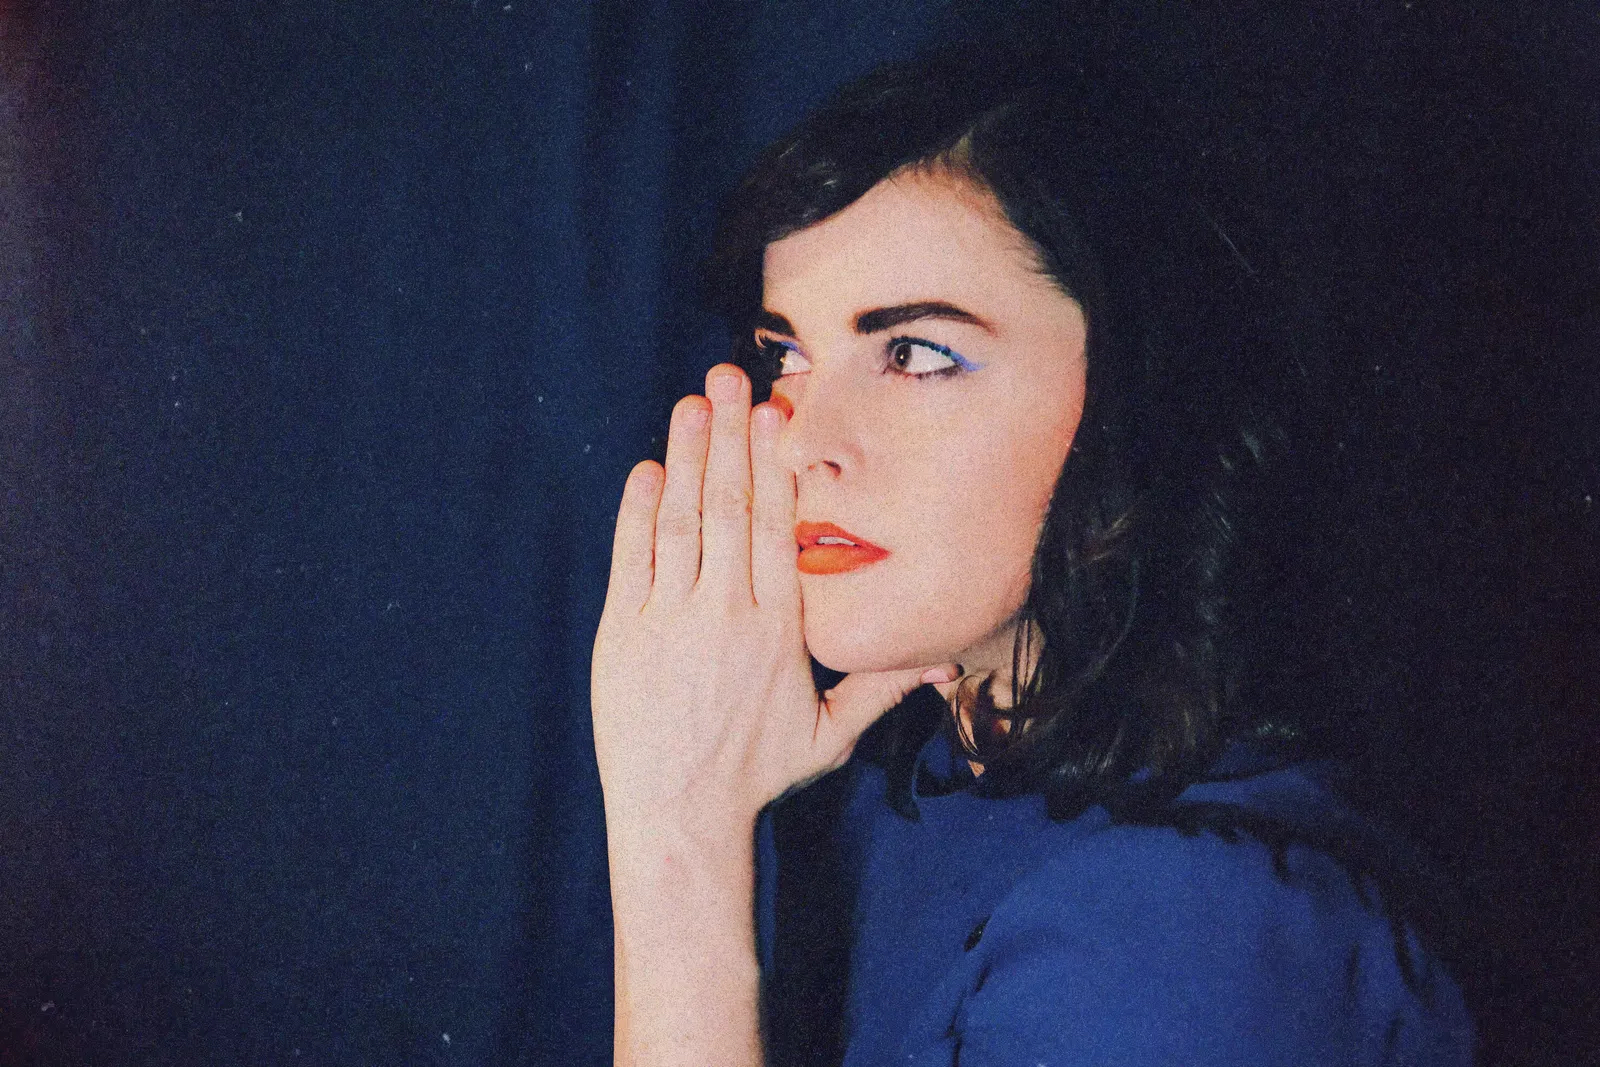 Tiffiny Costello, with a hand raised to her face, looks off to the left